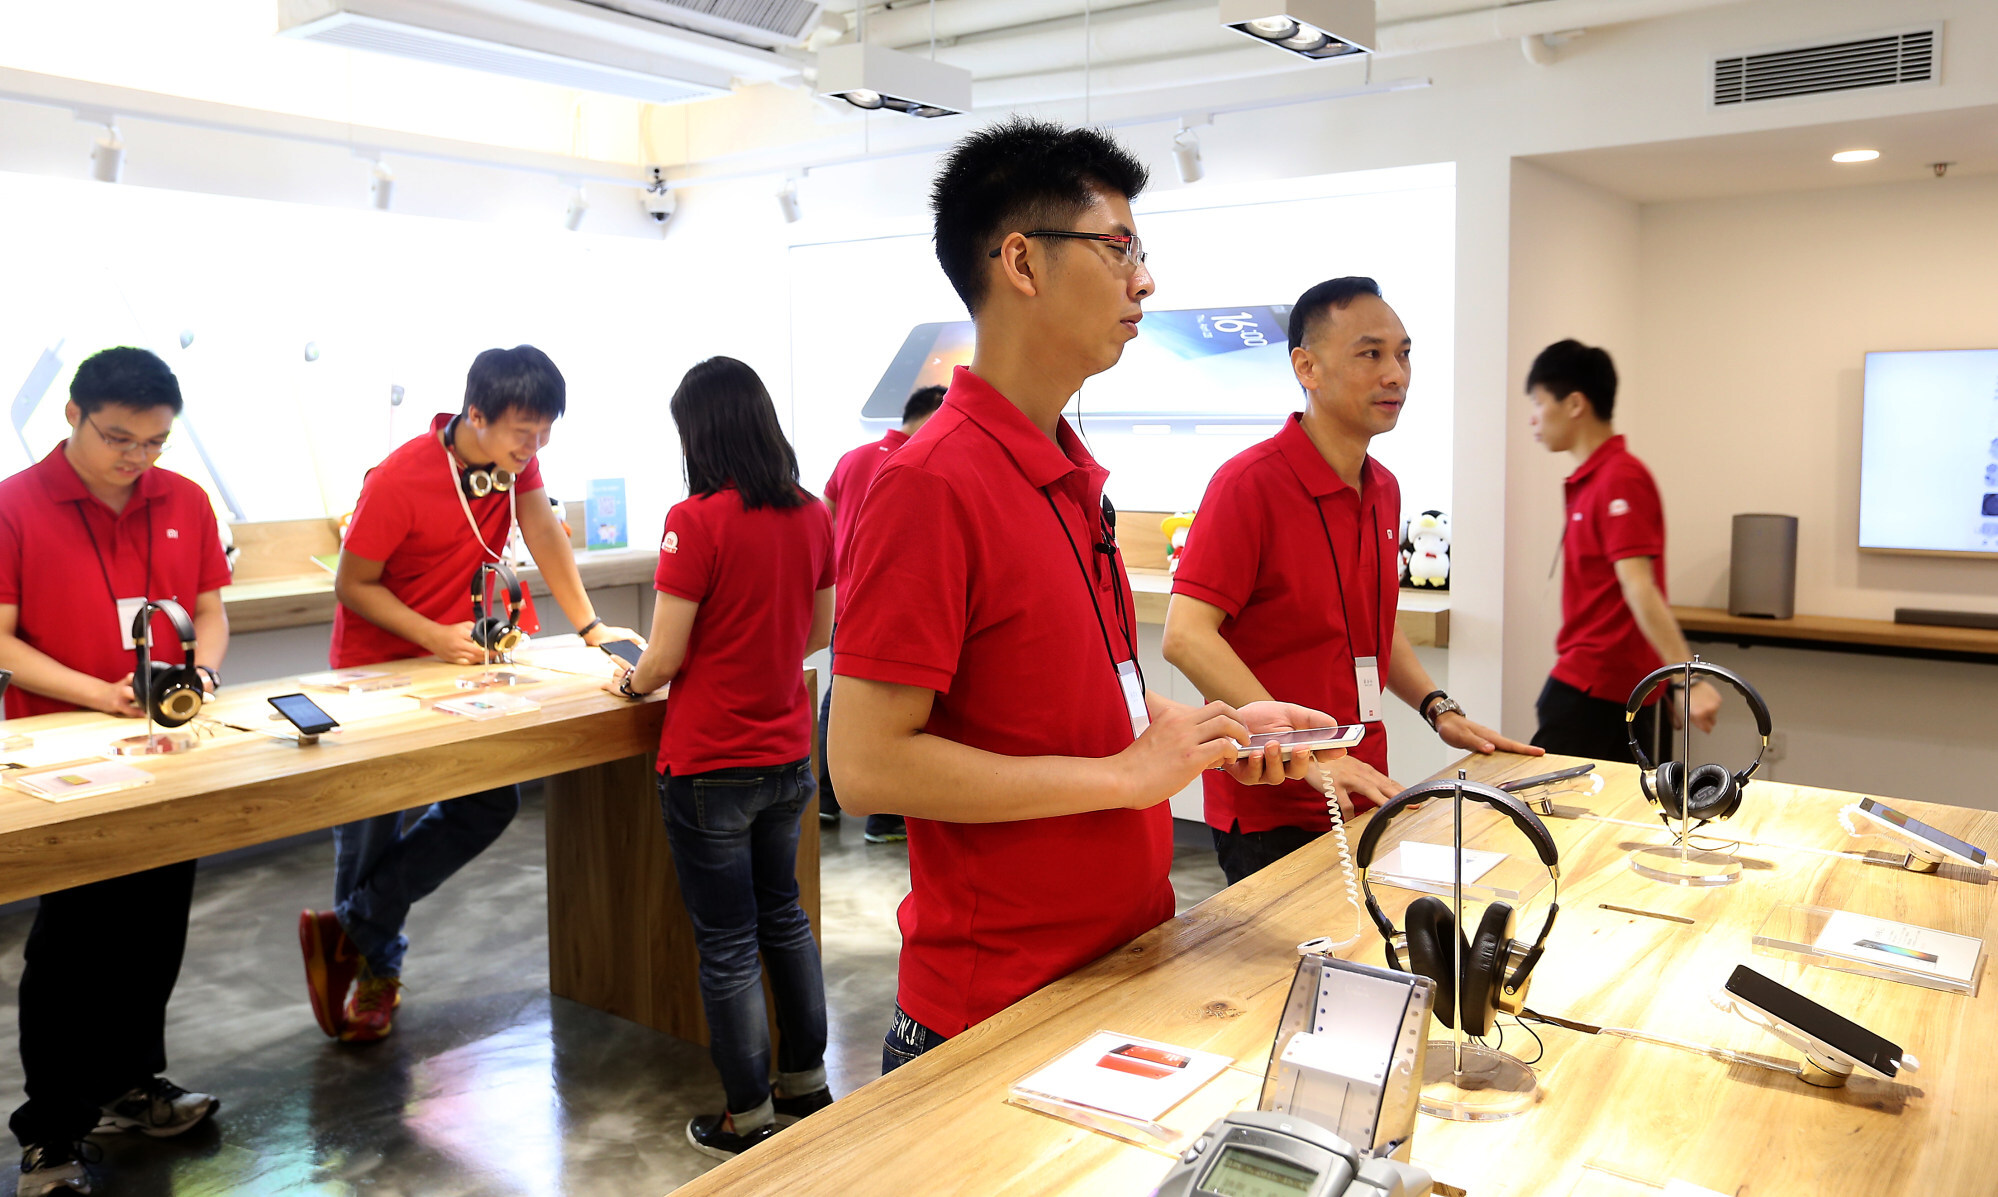 Like many other electronics brands, Xiaomi adopted an Apple Store aesthetic for its physical locations. Photo: K. Y. Cheng